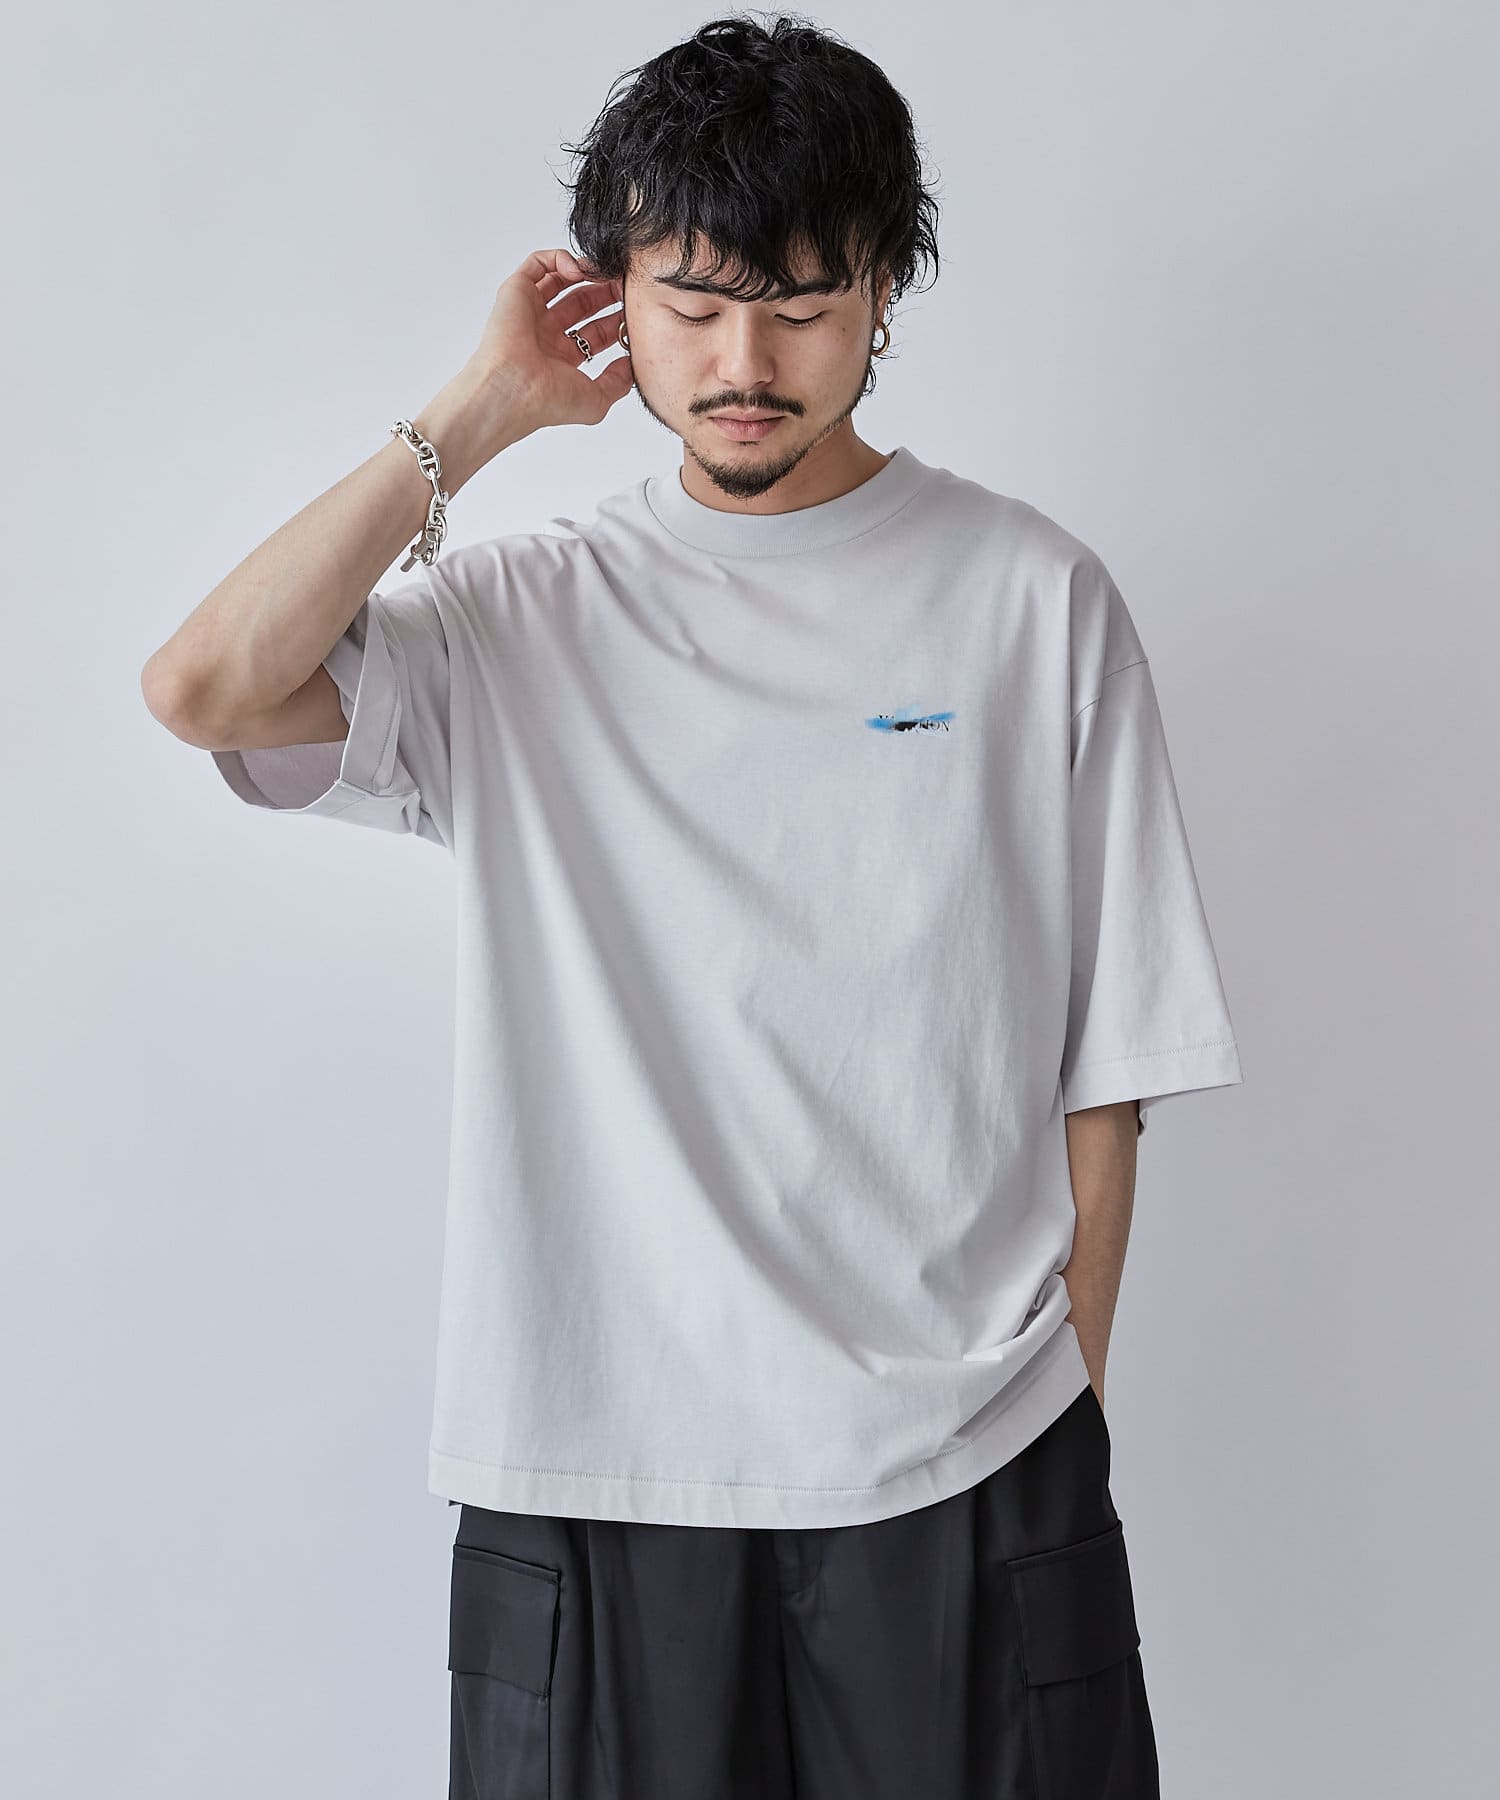 Lui's(ルイス) “Color Palette” プリントTシャツ